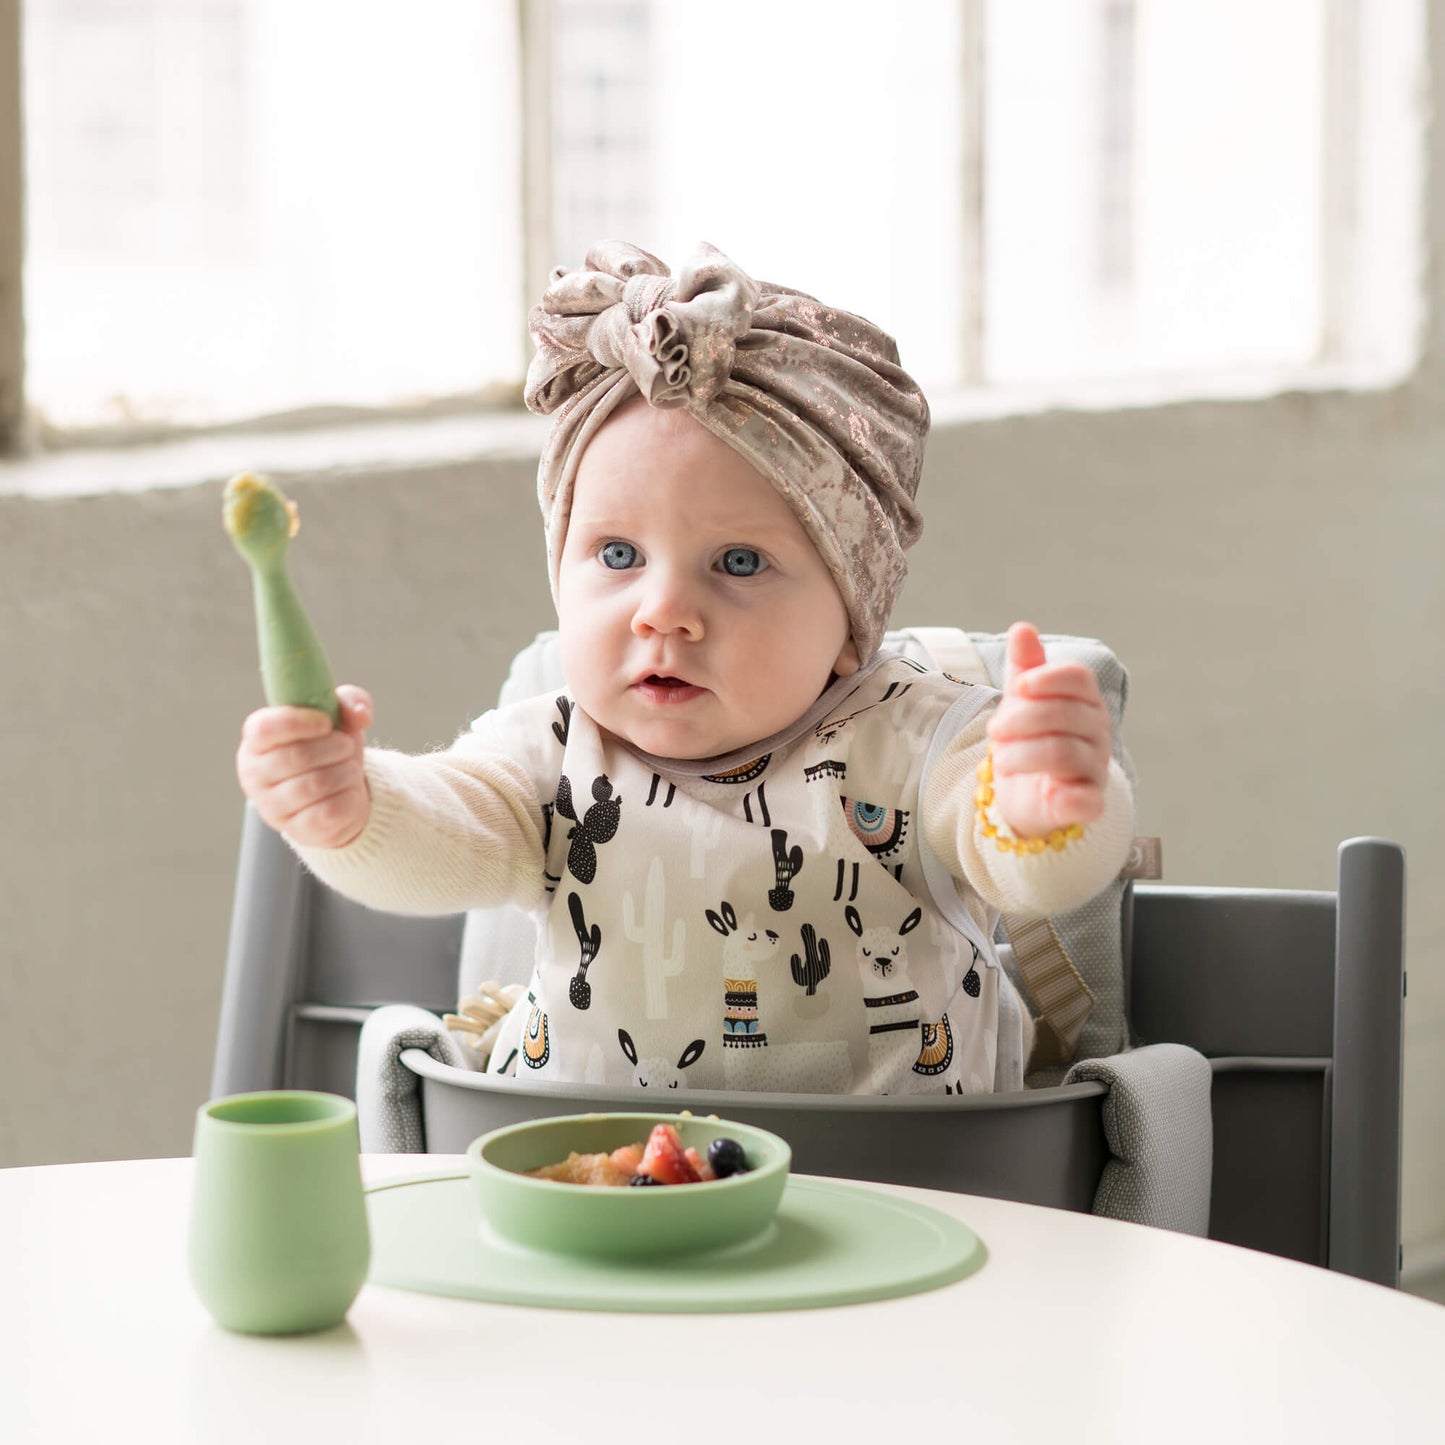 The Tiny Spoon in Sage by ezpz / Small, Sensory Silicone Spoon for Babies